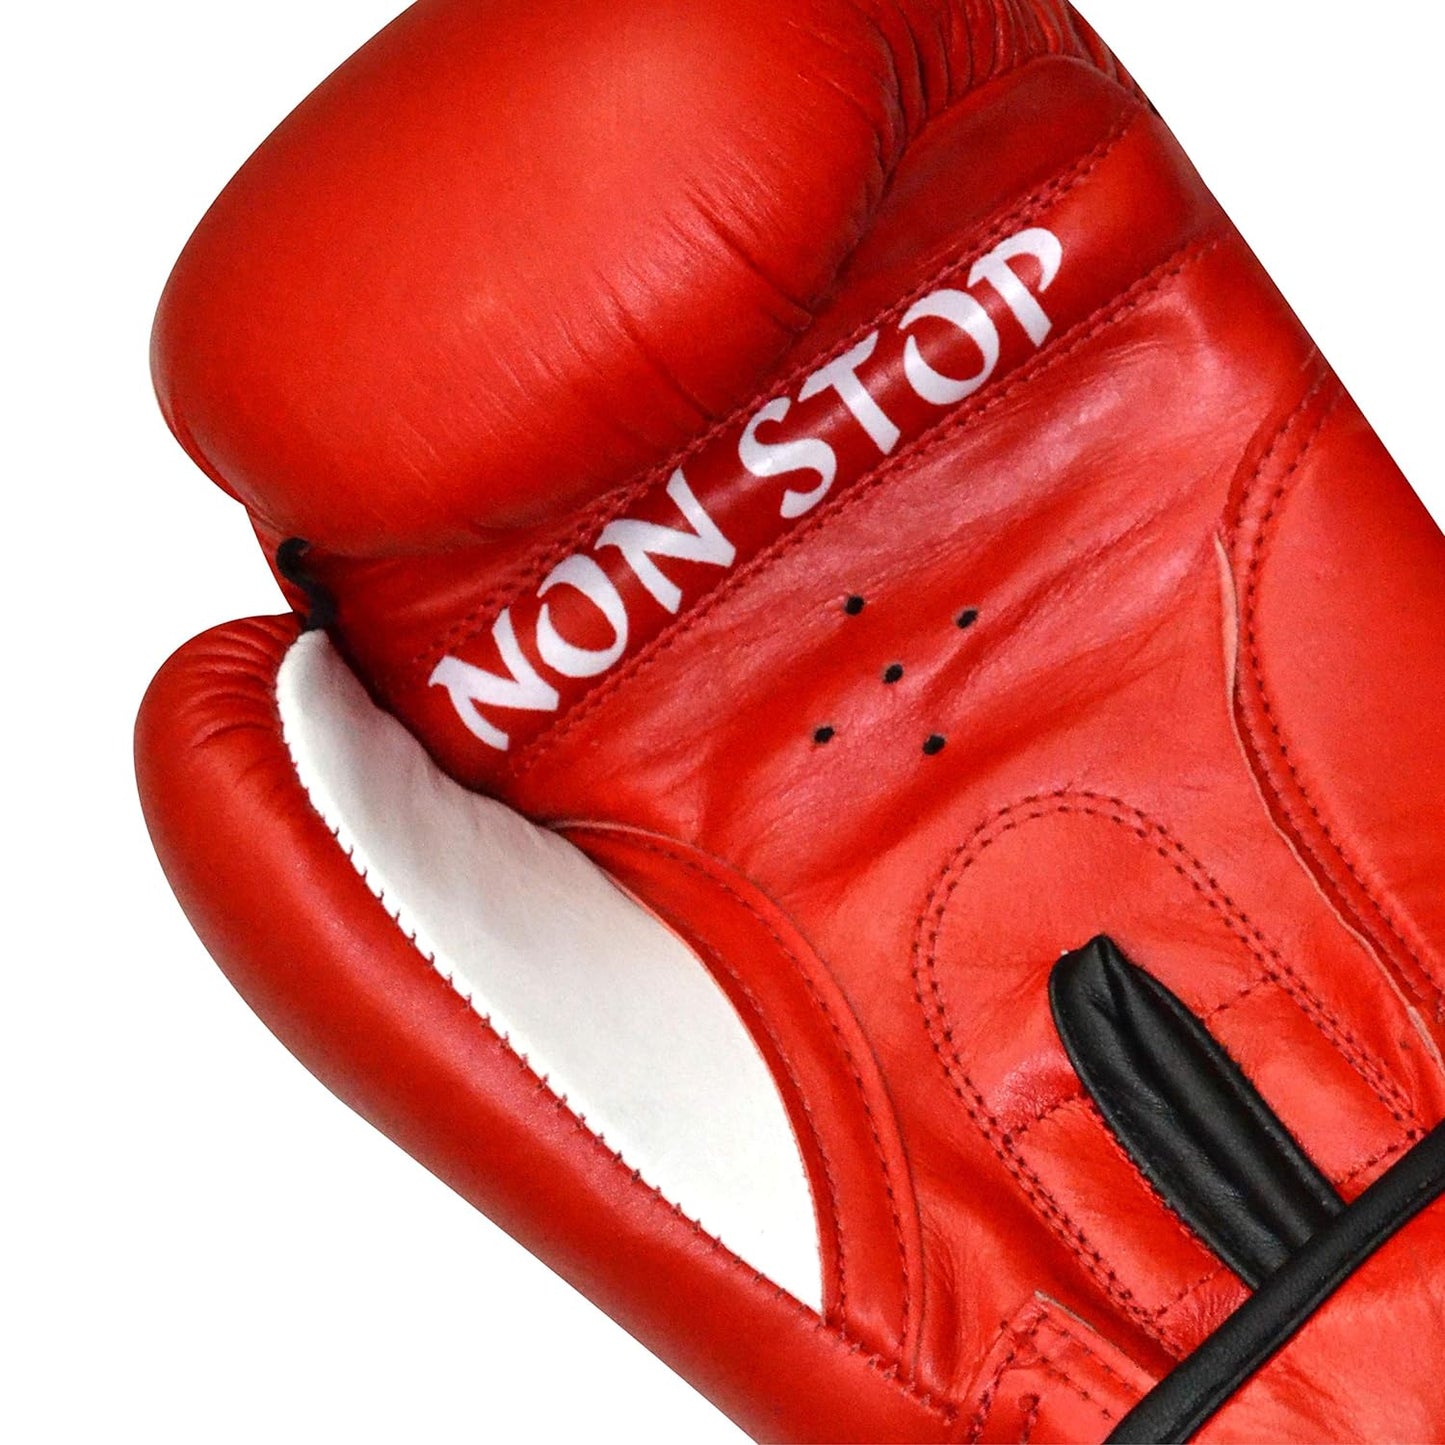 RXN Amateur Contest Boxing Gloves All Leather (BG-11)